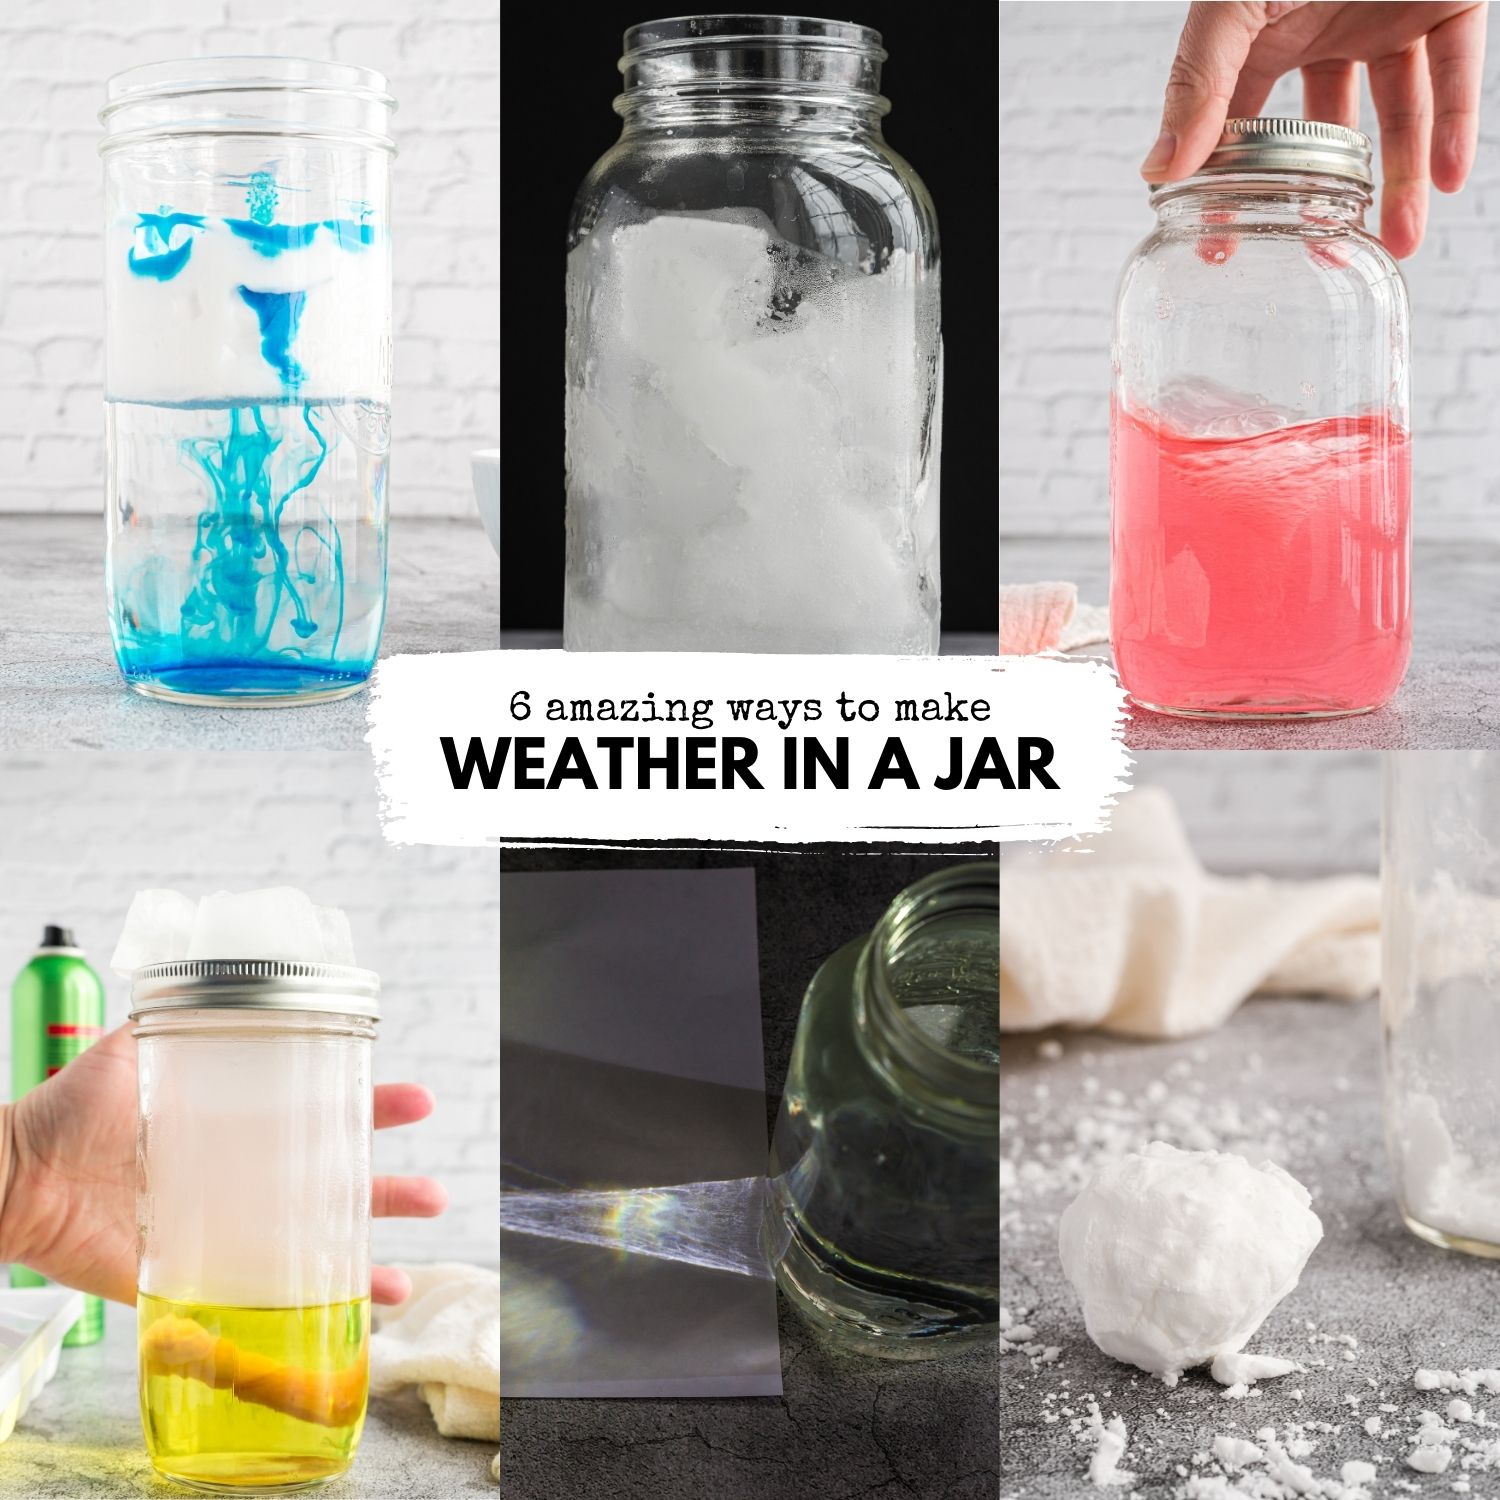 6 Amazing Ways to Make Weather in a Jar